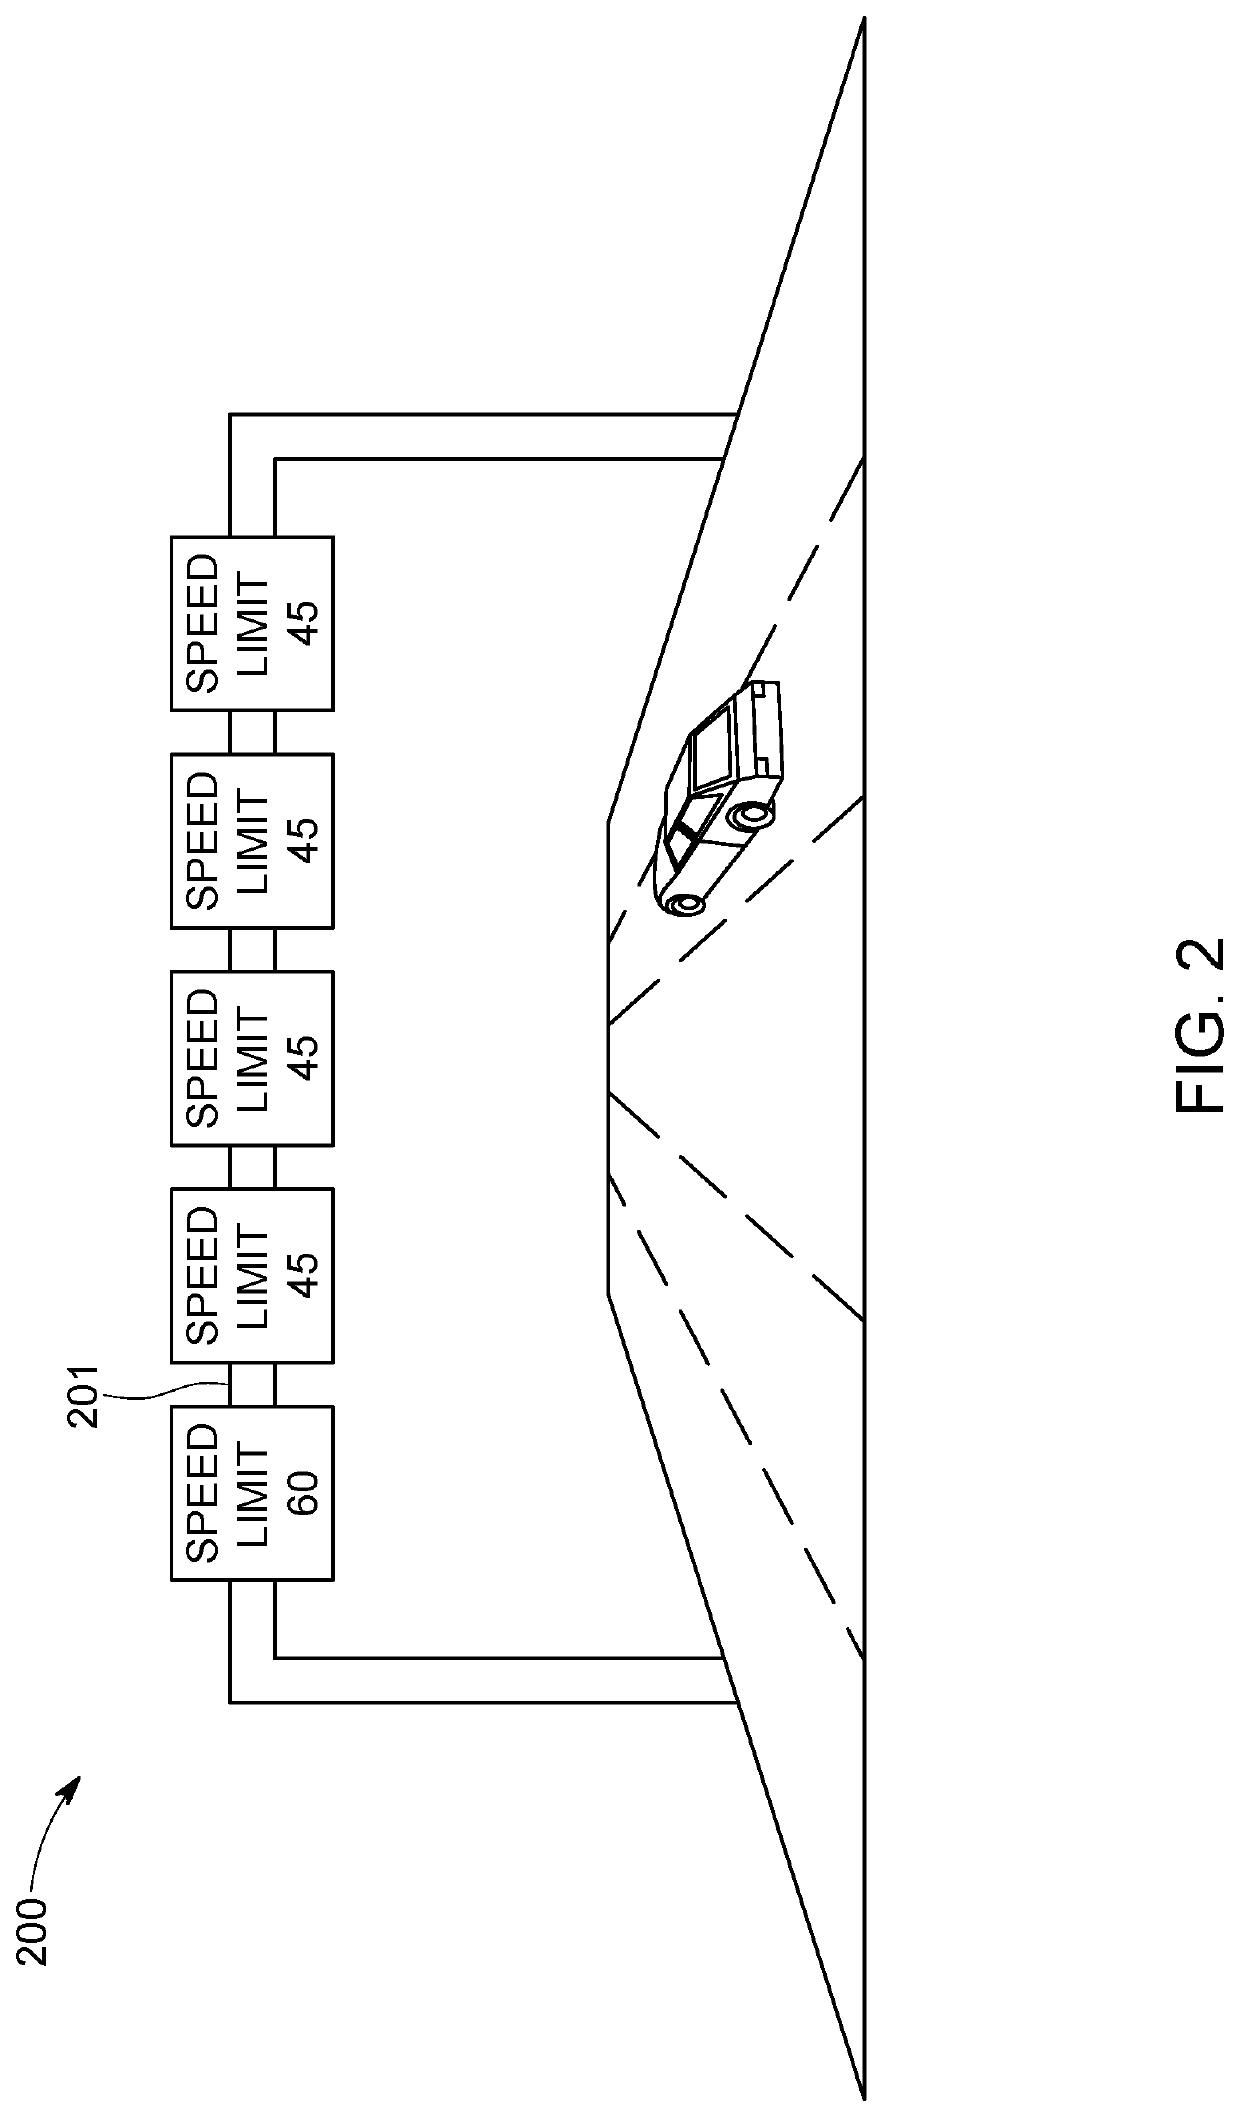 Method and system for classifying vehicle based road sign observations